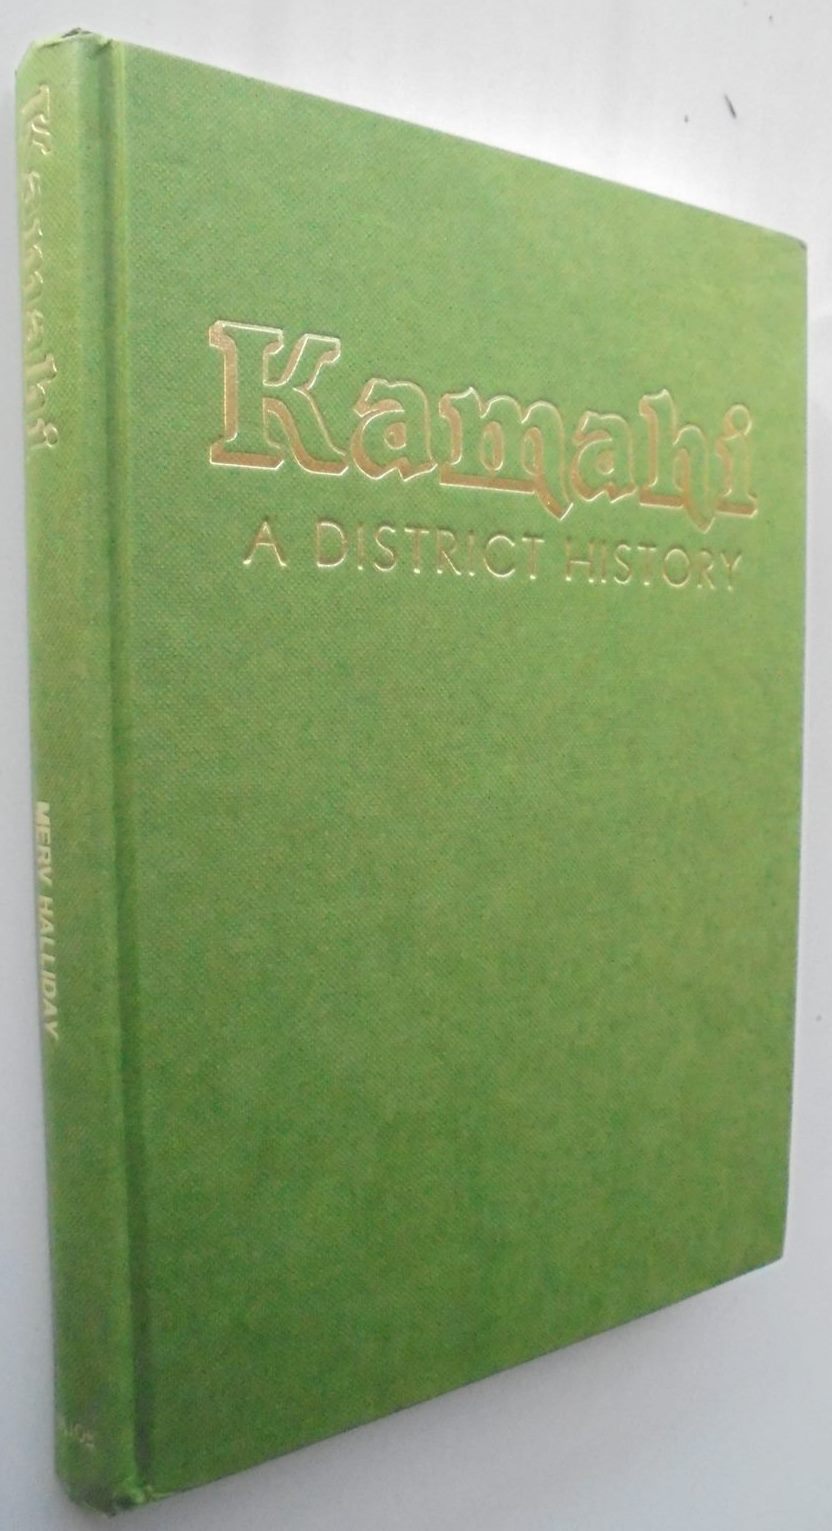 Kamahi A District History By Merv Halliday. SIGNED BY AUTHOR. VERY SCARCE.